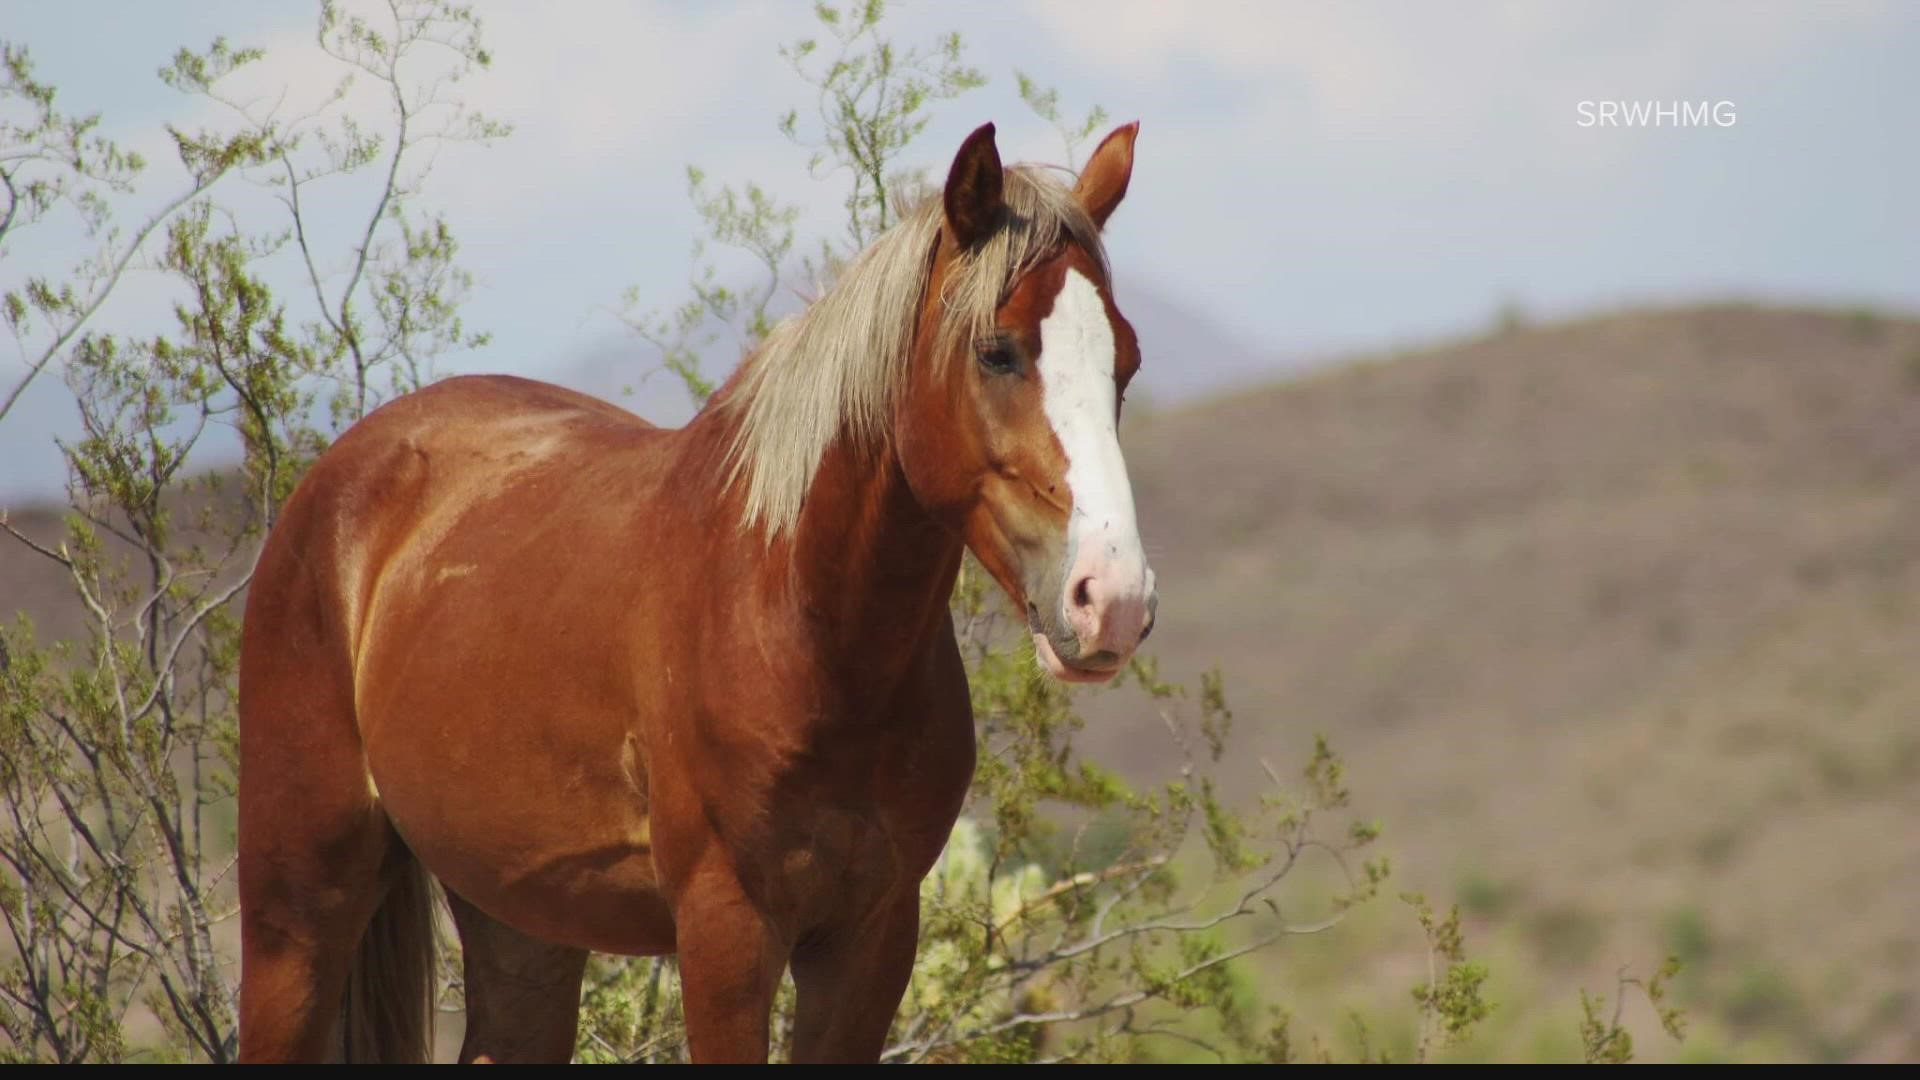 A Salt River wild horse was euthanized on Sunday after eating plastic. Two days after ingesting the plastic, the horse was unable to eat or drink.